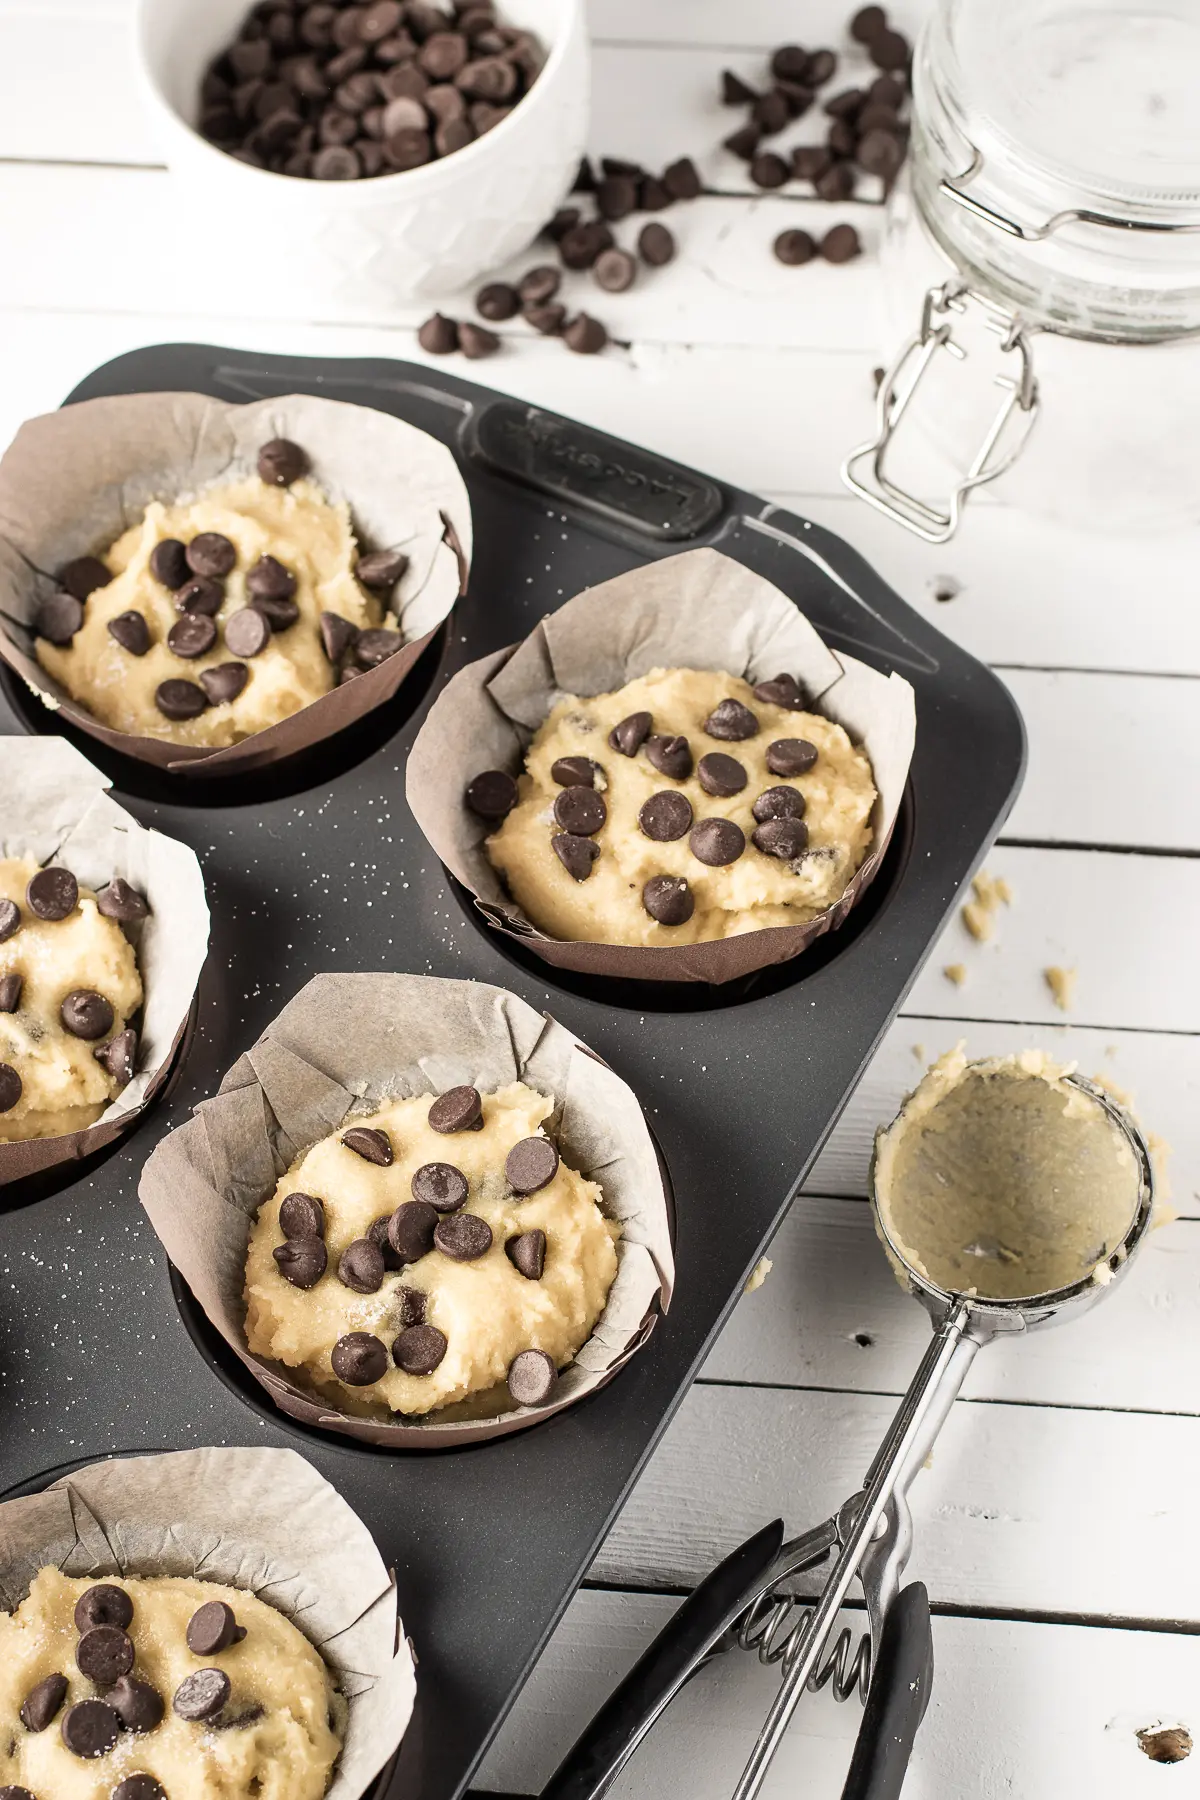 Chocolate chip muffin batter in a muffin tray on a white background